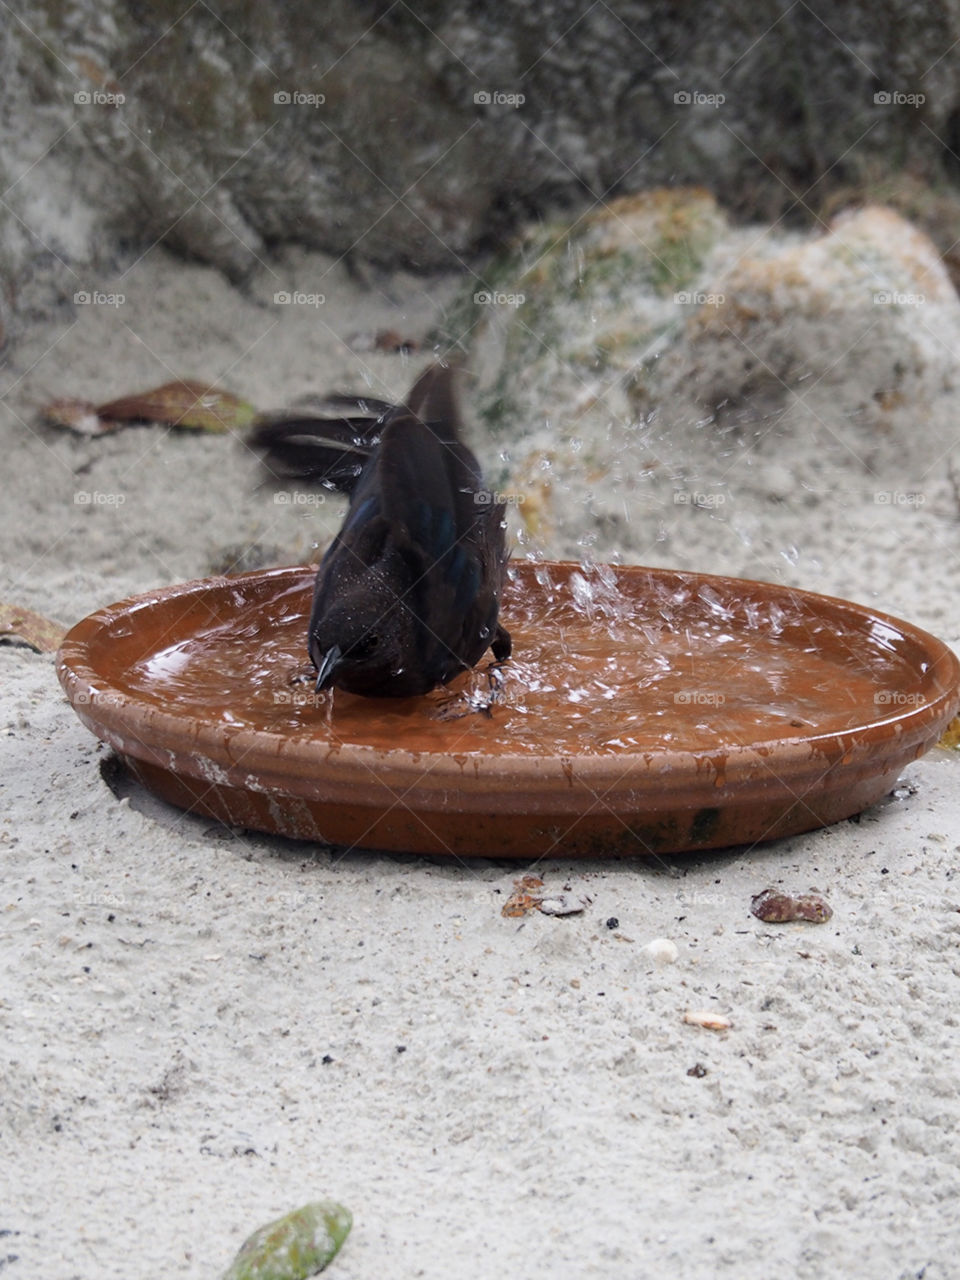 Shake it Off. Grackle shaking off water while taking a bath